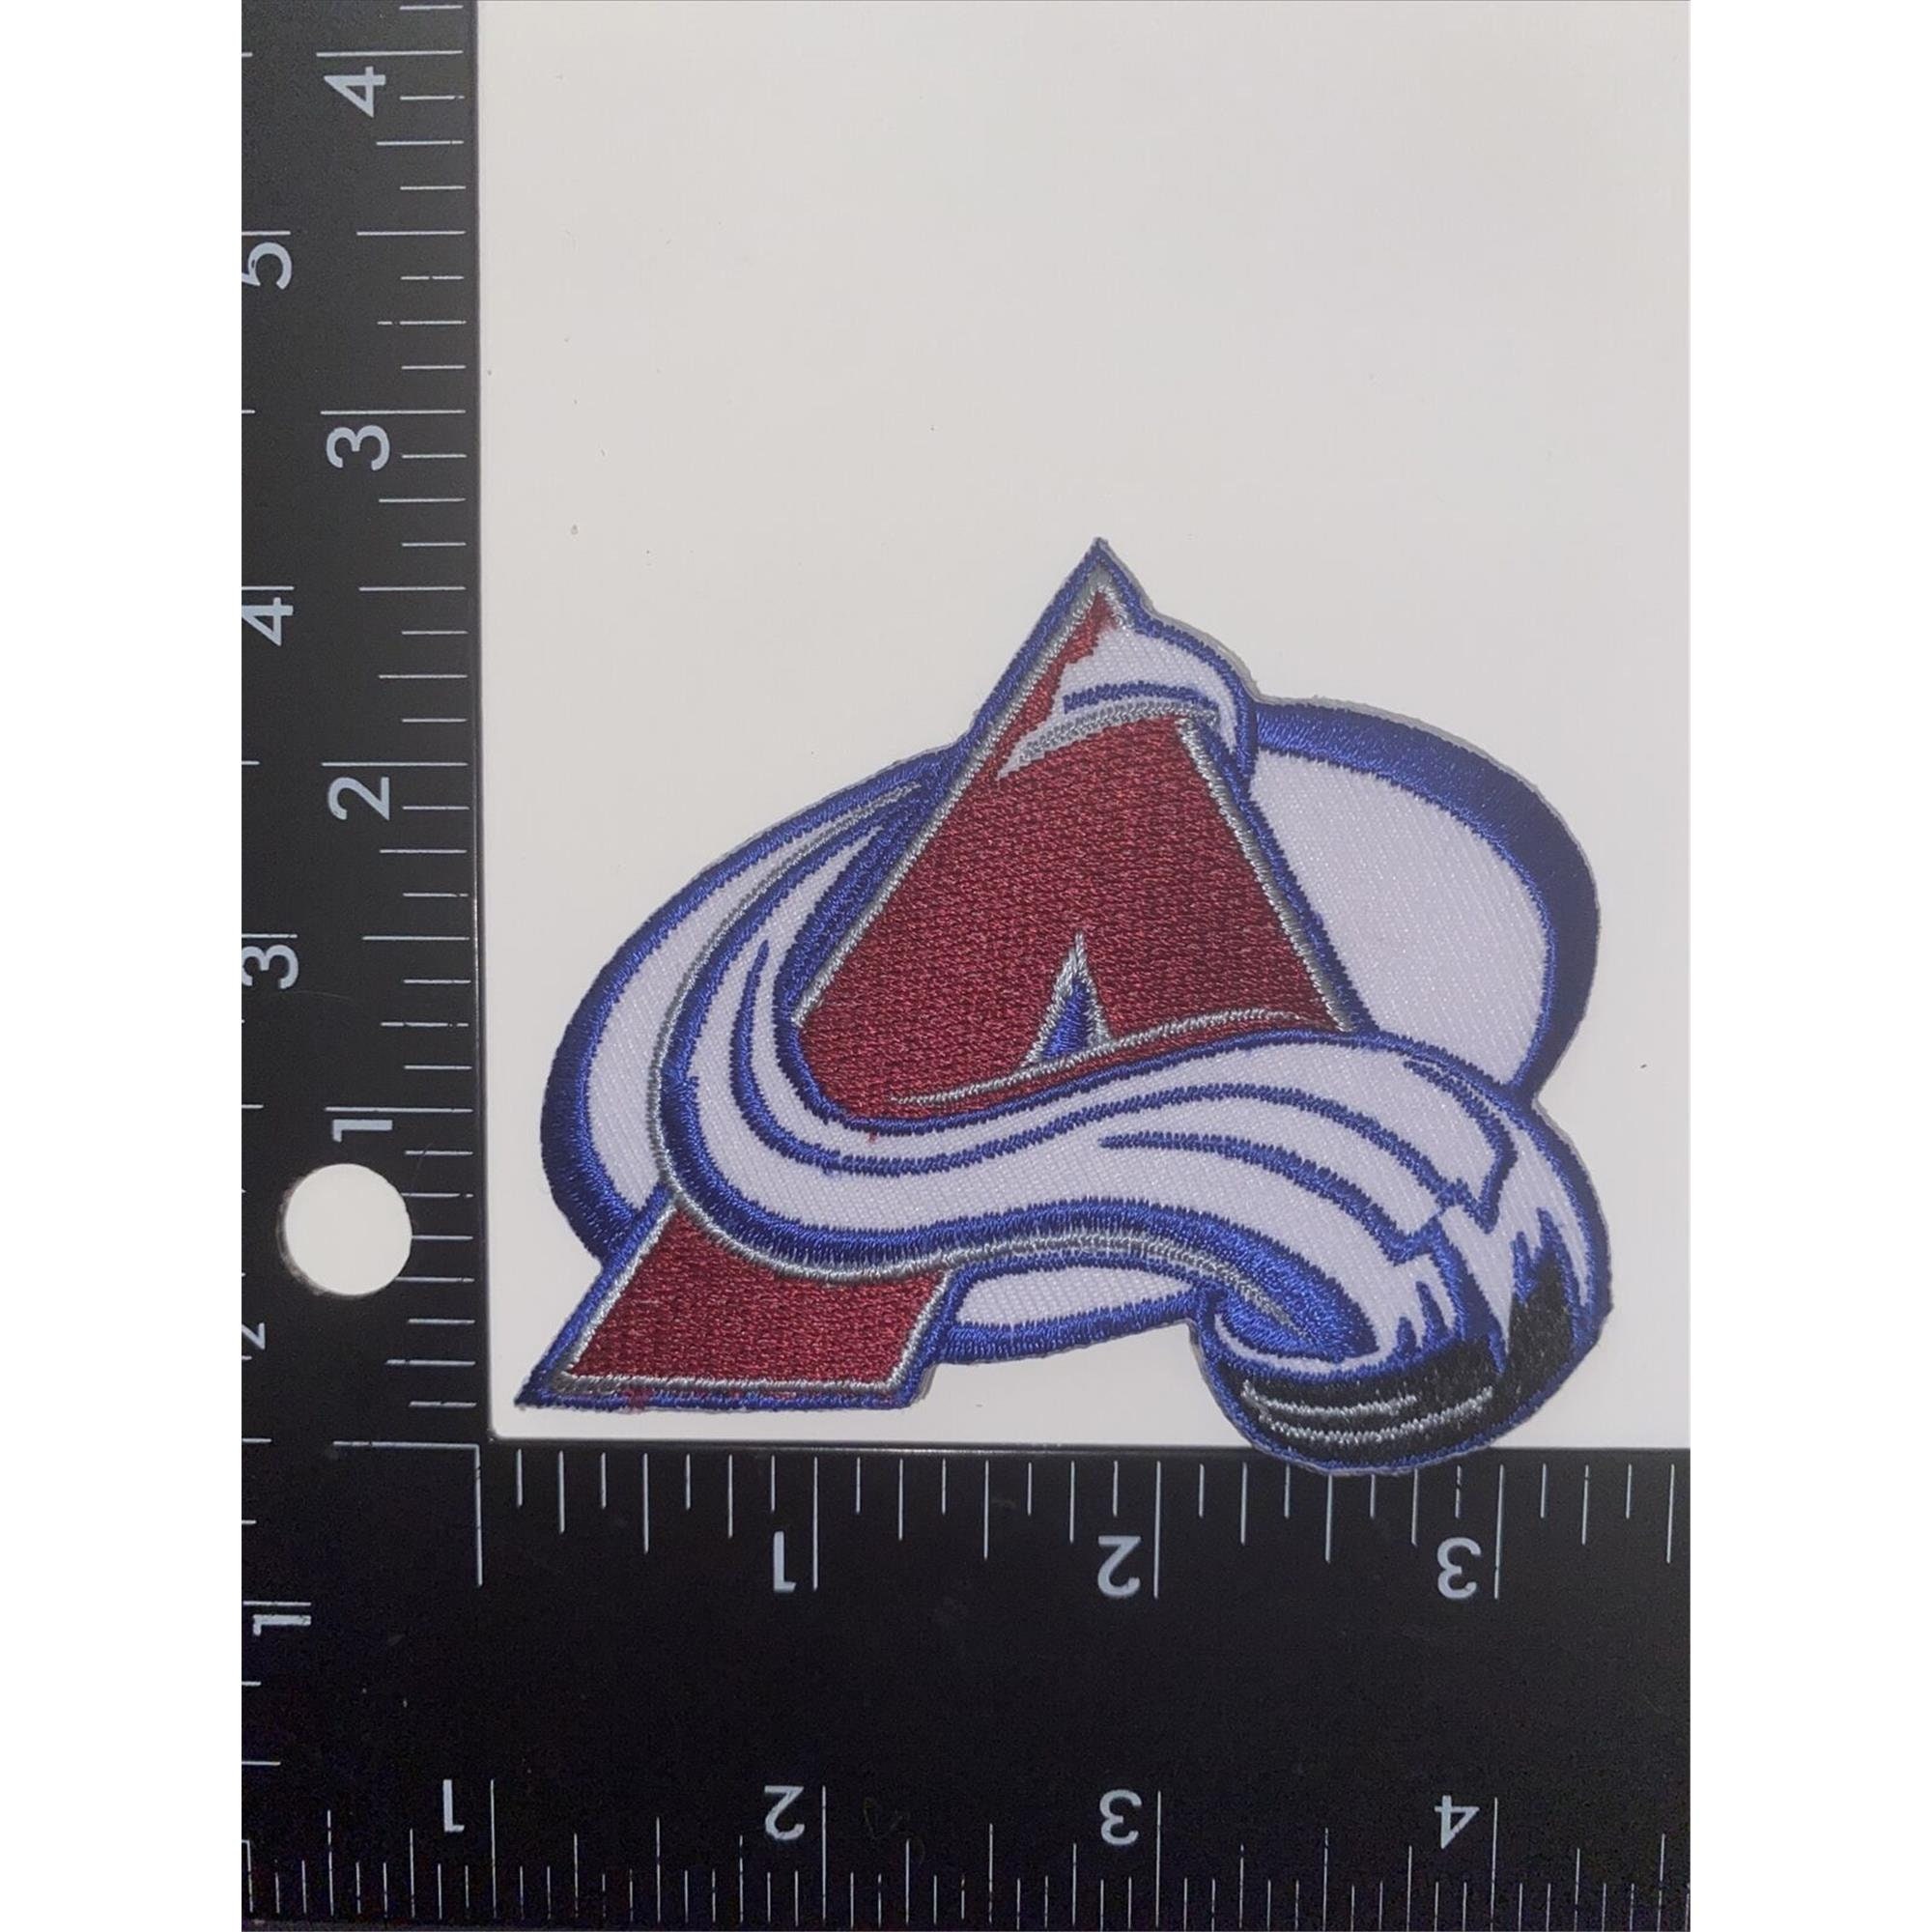 AVALANCHE Cutest Fan Toddler T-shirt Makes a Perfect Gift 